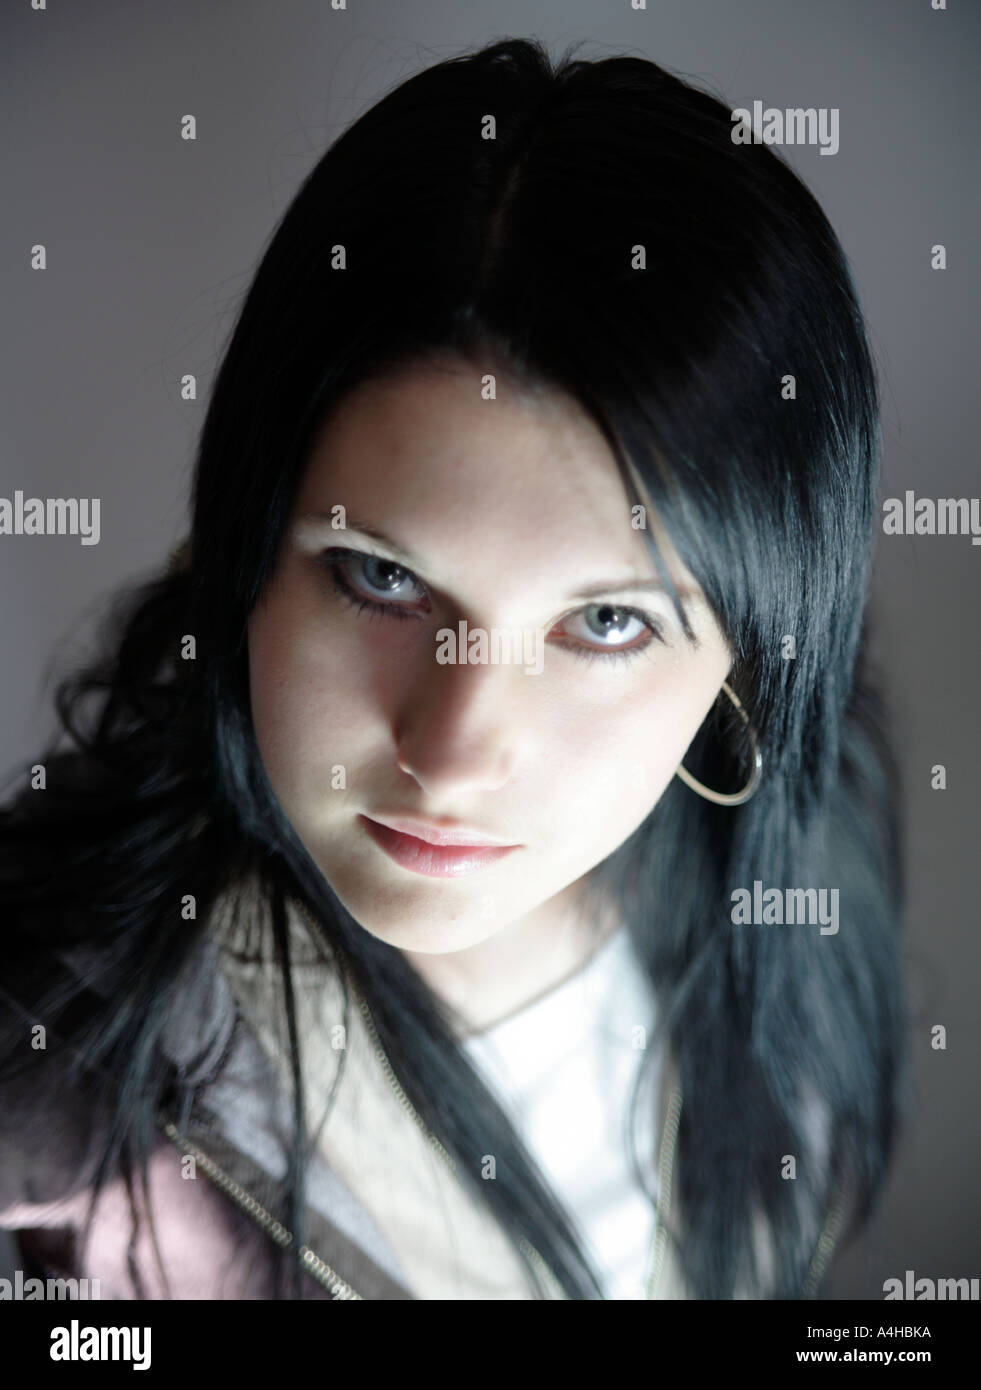 Young girl aged 16 with black hair upwards confident look with harsh blue light somewhat mystical Stock Photo